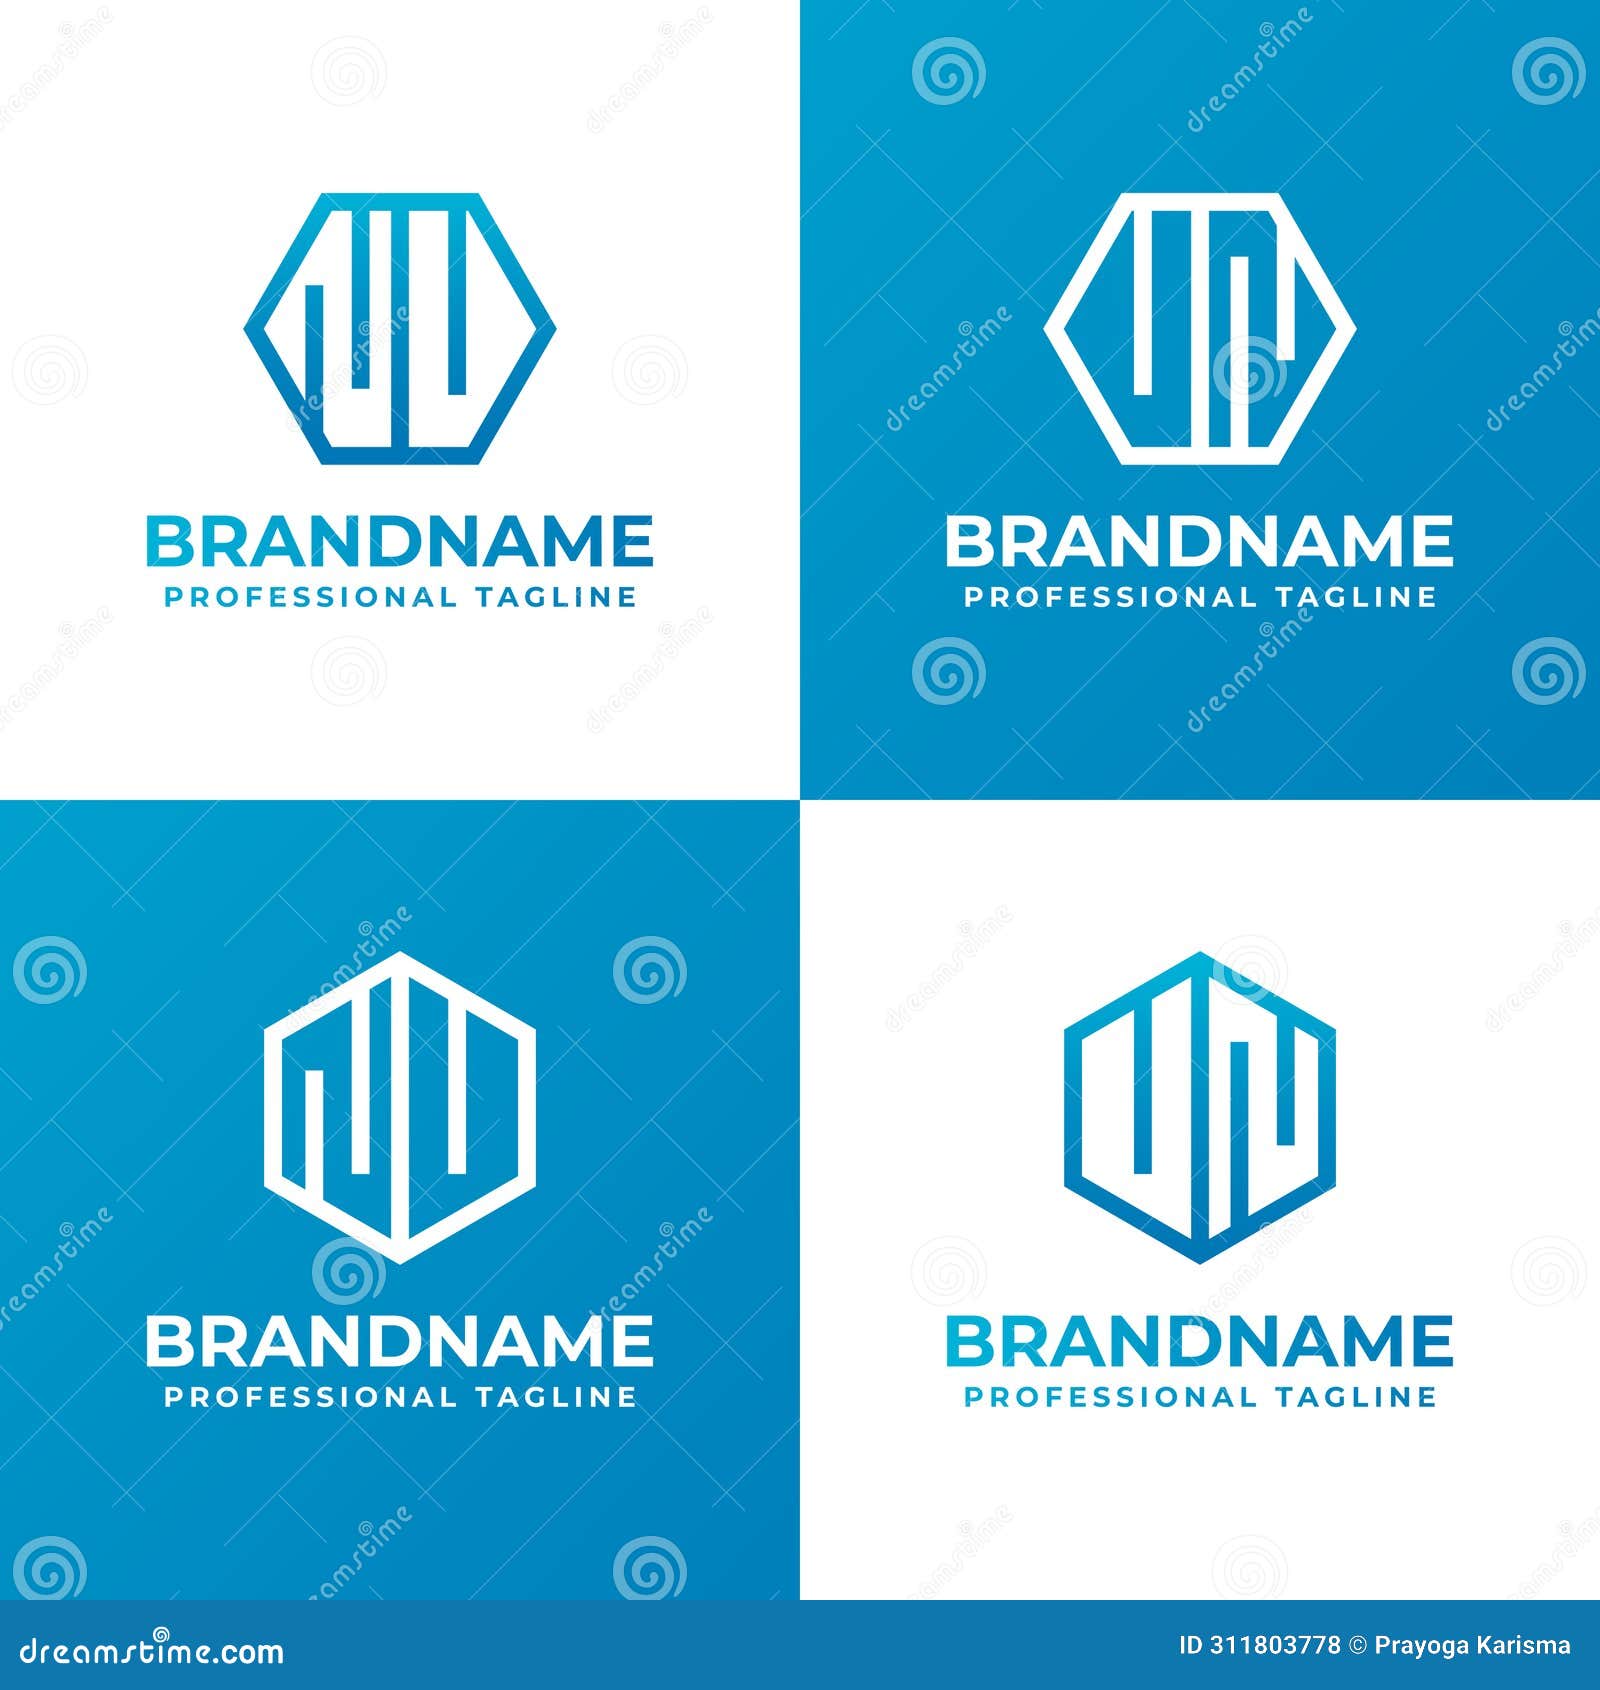 letters nu or nv and un or vn hexagon logo set, suitable for business with nu, nv, un, or vn initials